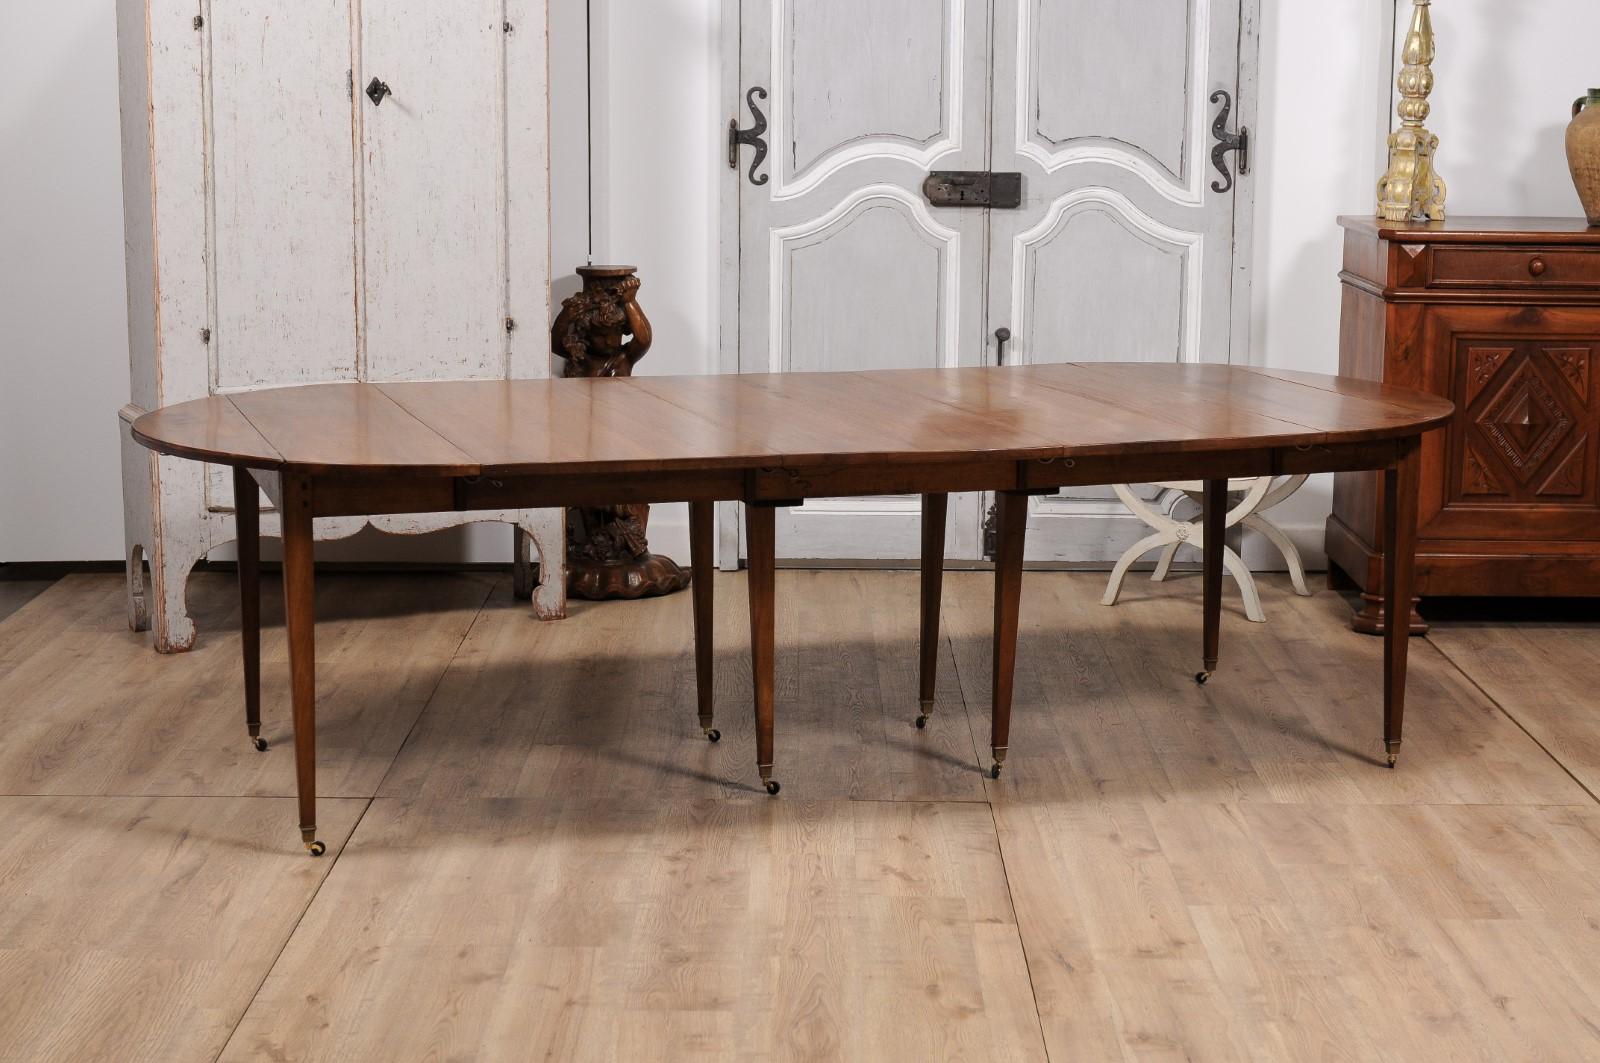 French Turn of the Century Extension Walnut Table With Five Leaves Circa 1900 For Sale 4